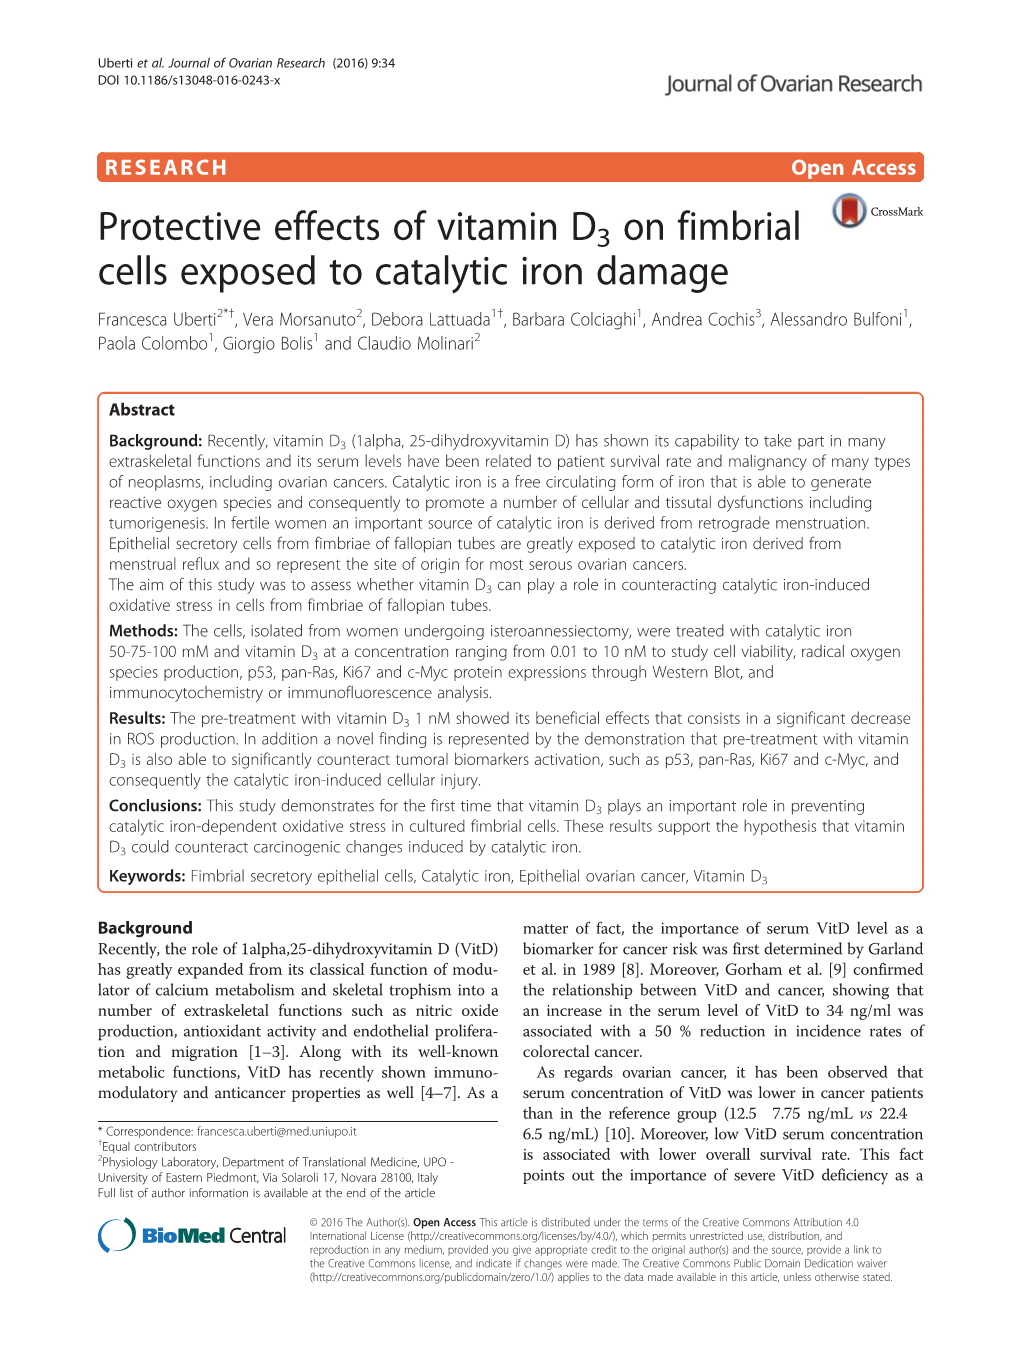 Protective Effects of Vitamin D3 on Fimbrial Cells Exposed to Catalytic